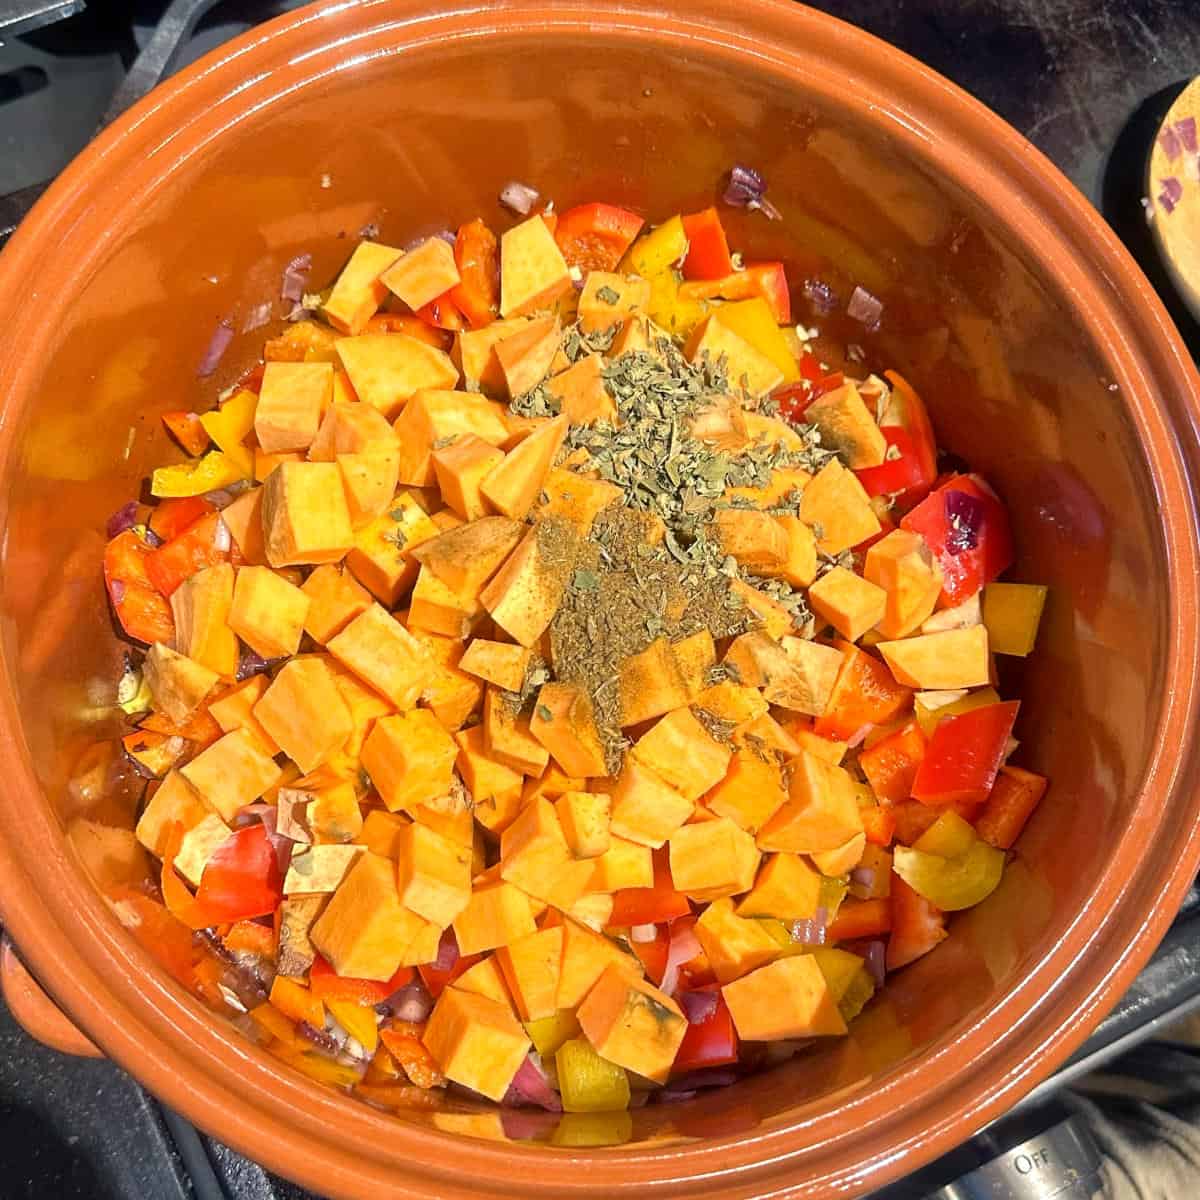 Sweet potatoes and herbs and spices added to pot with bell peppers and onions.